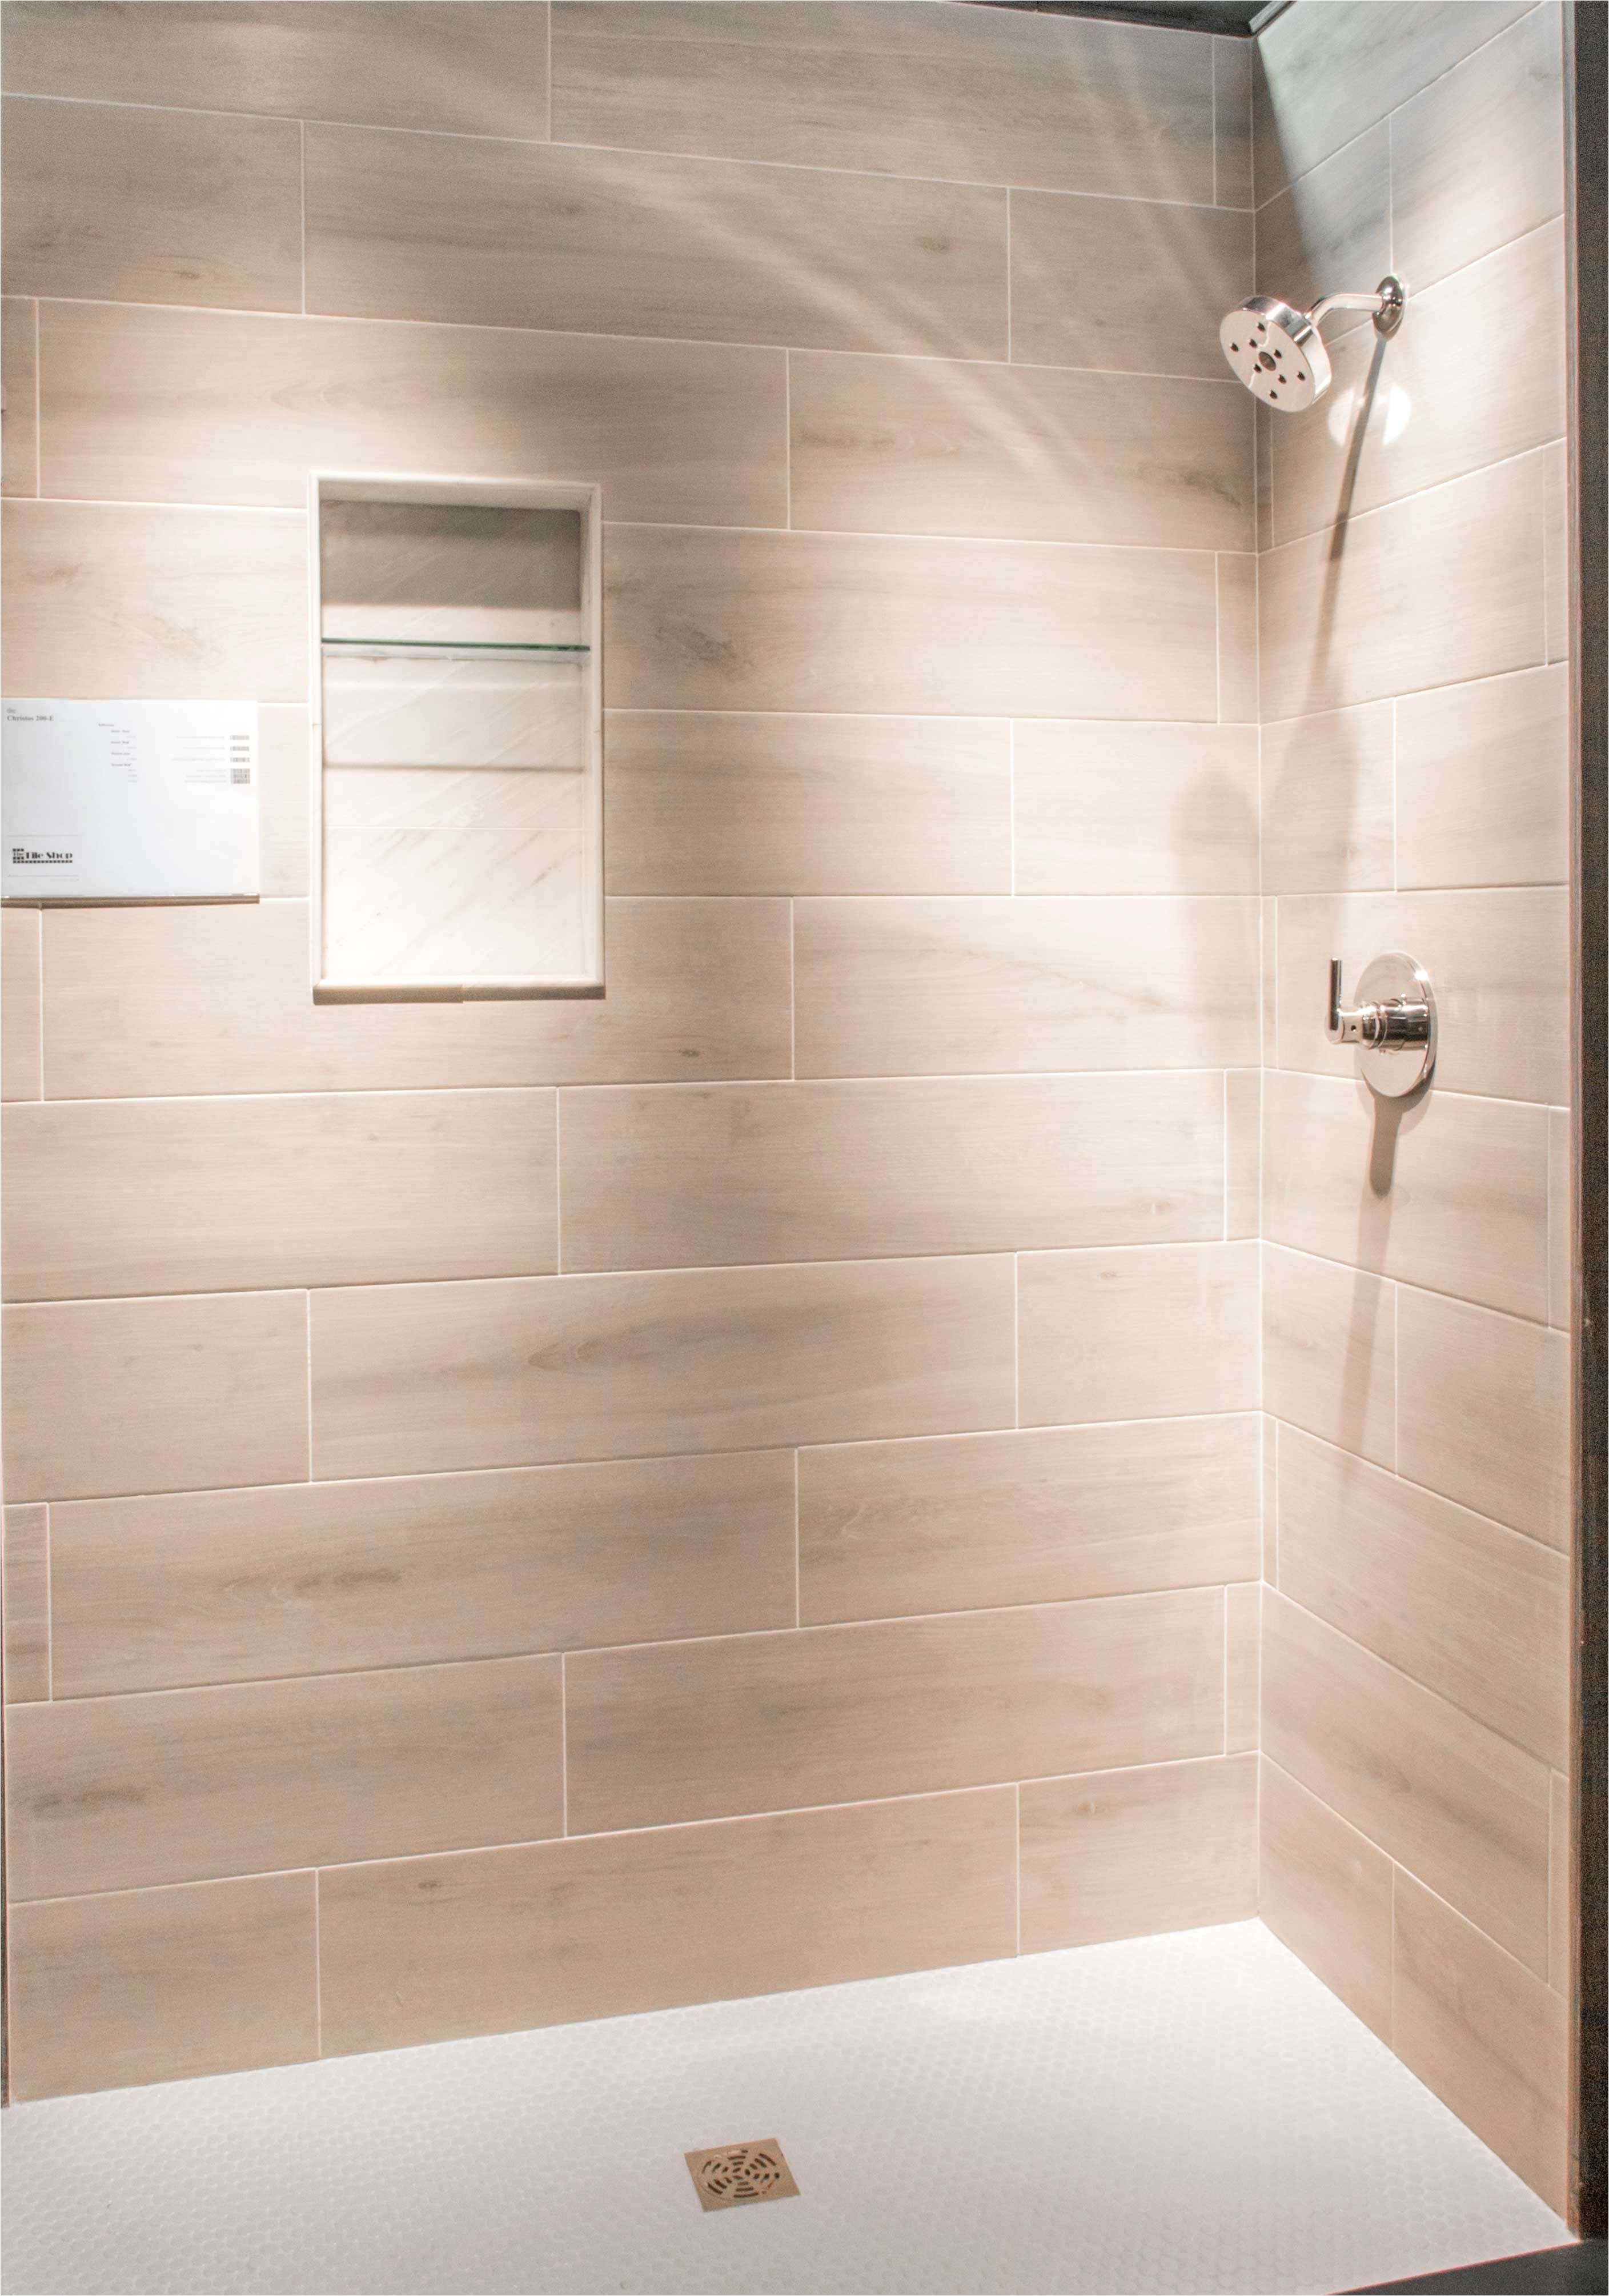 Best Grout for Shower Walls and Floors 50 New Ceramic Tile for Shower Walls Exitrealestate540